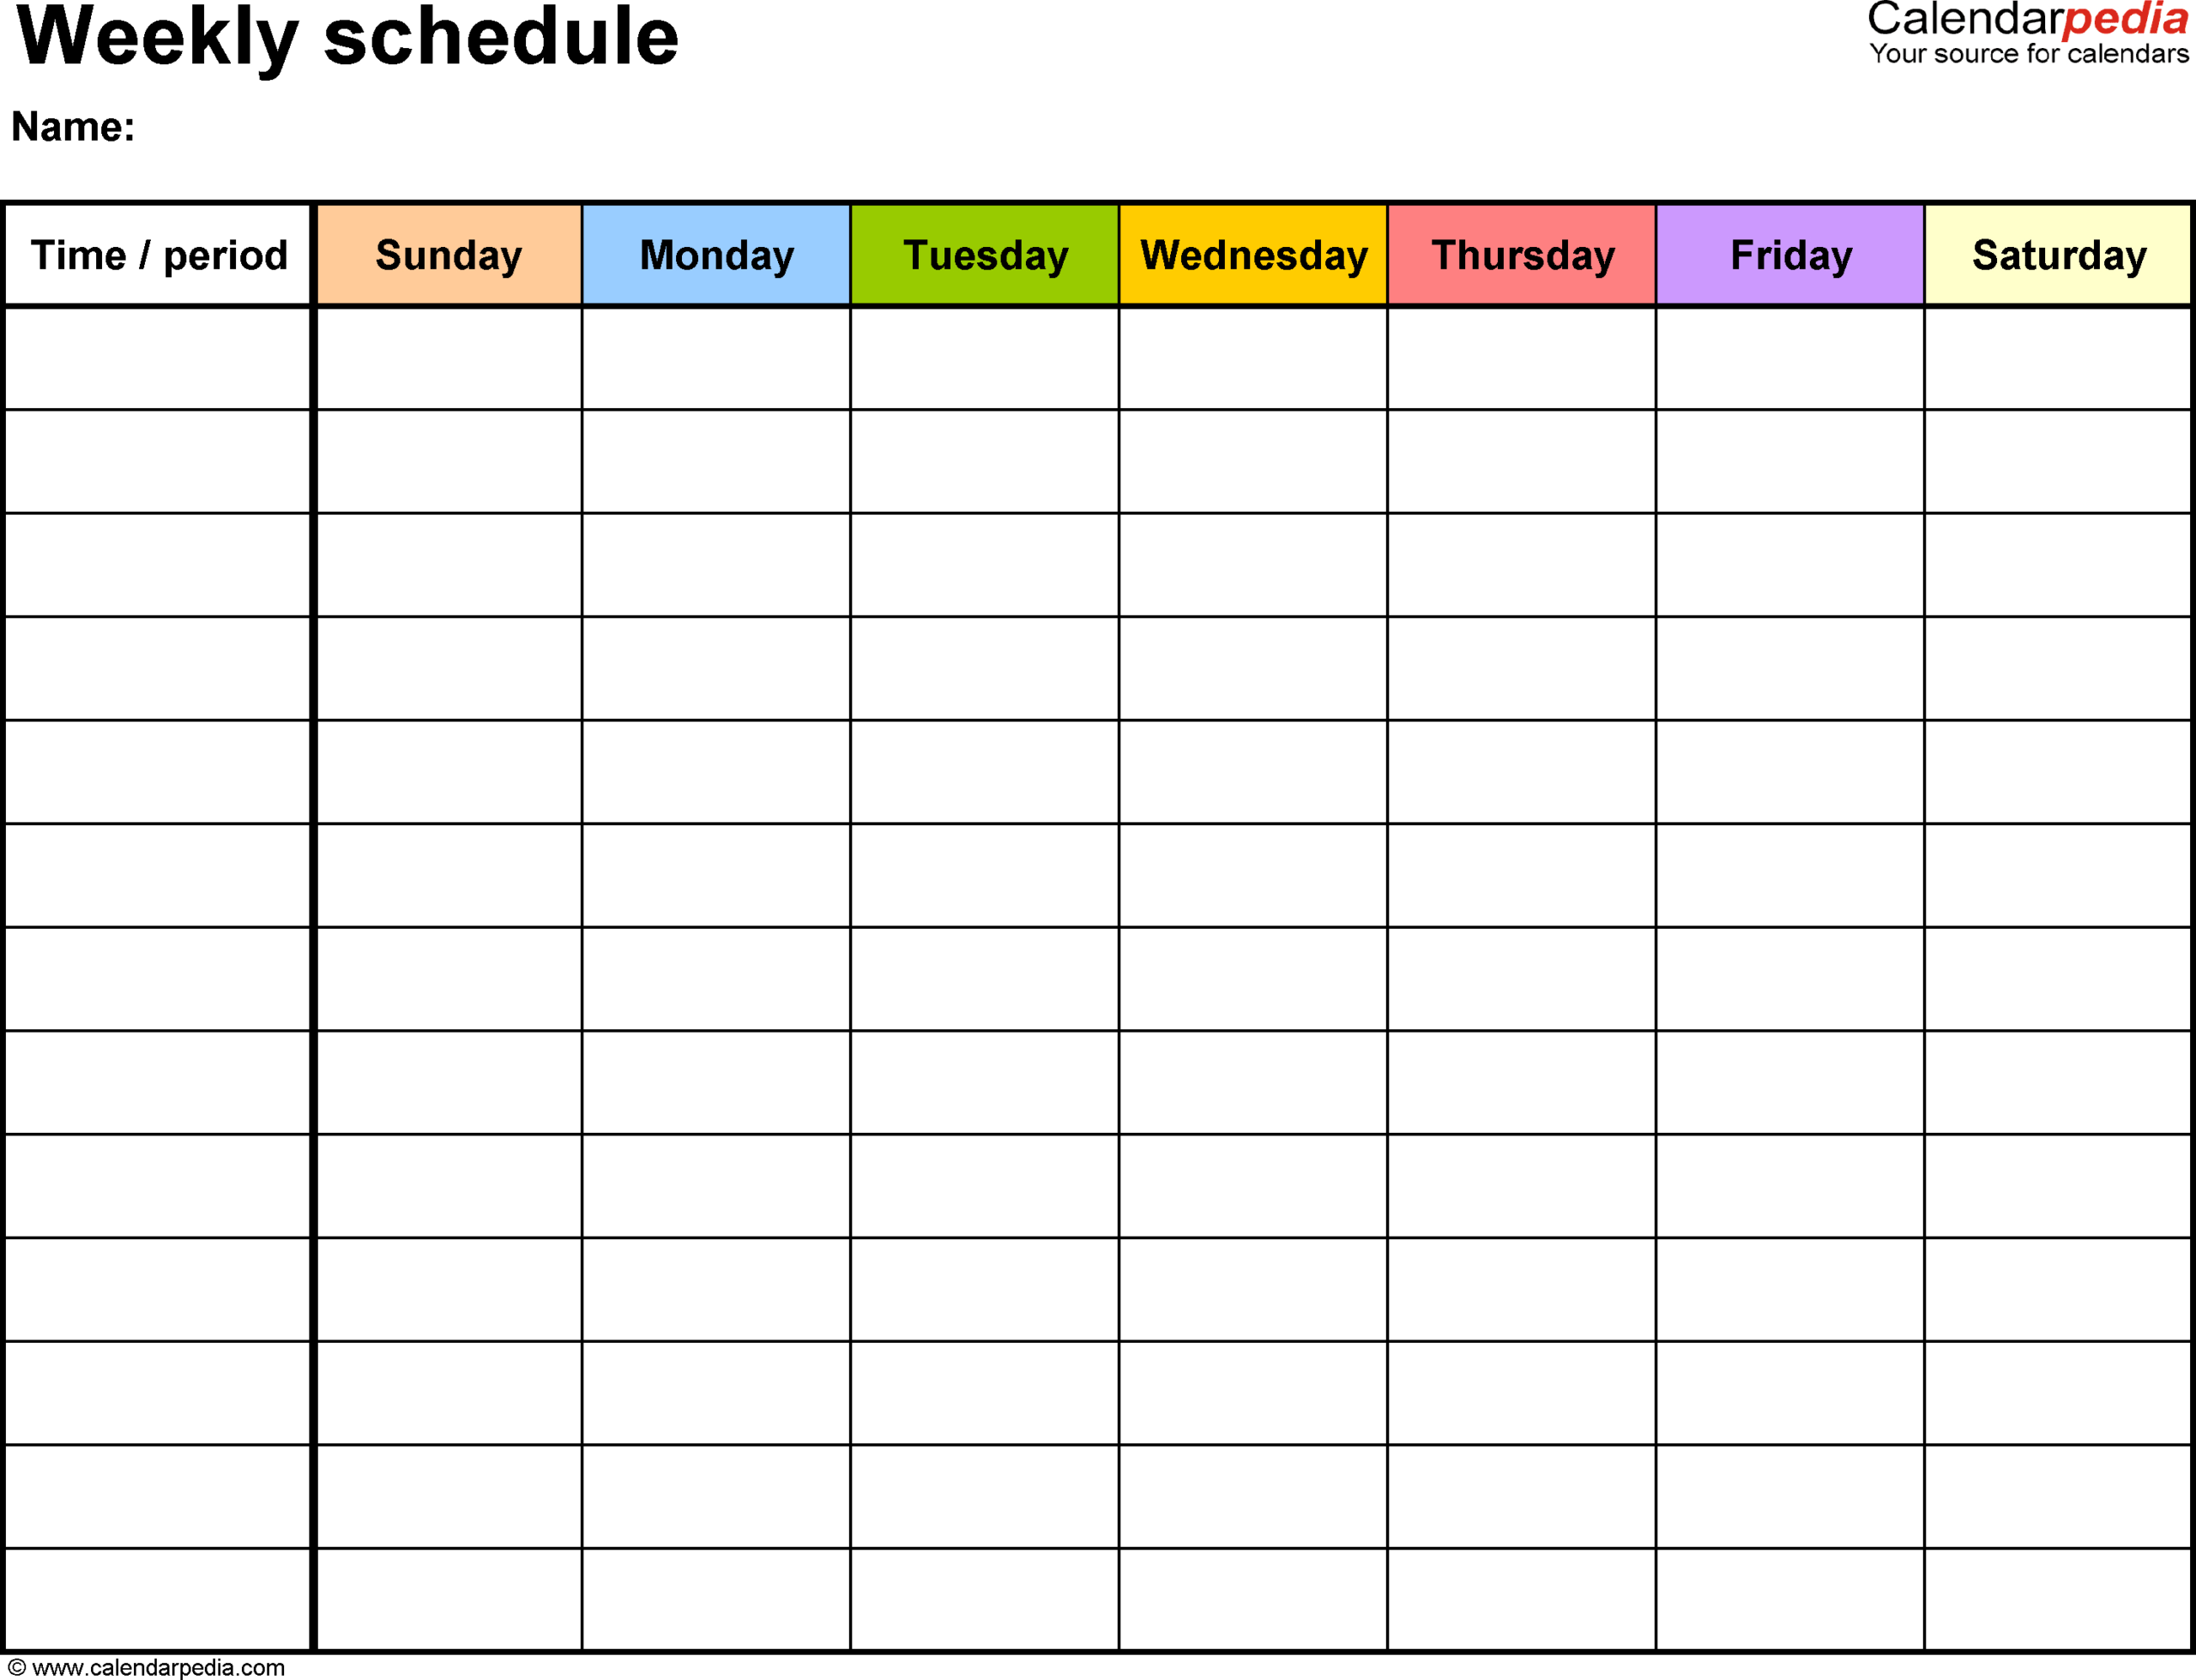 7 Day Schedule Template Blank :Free Calendar Template with 7 Day Week Calendar Printable